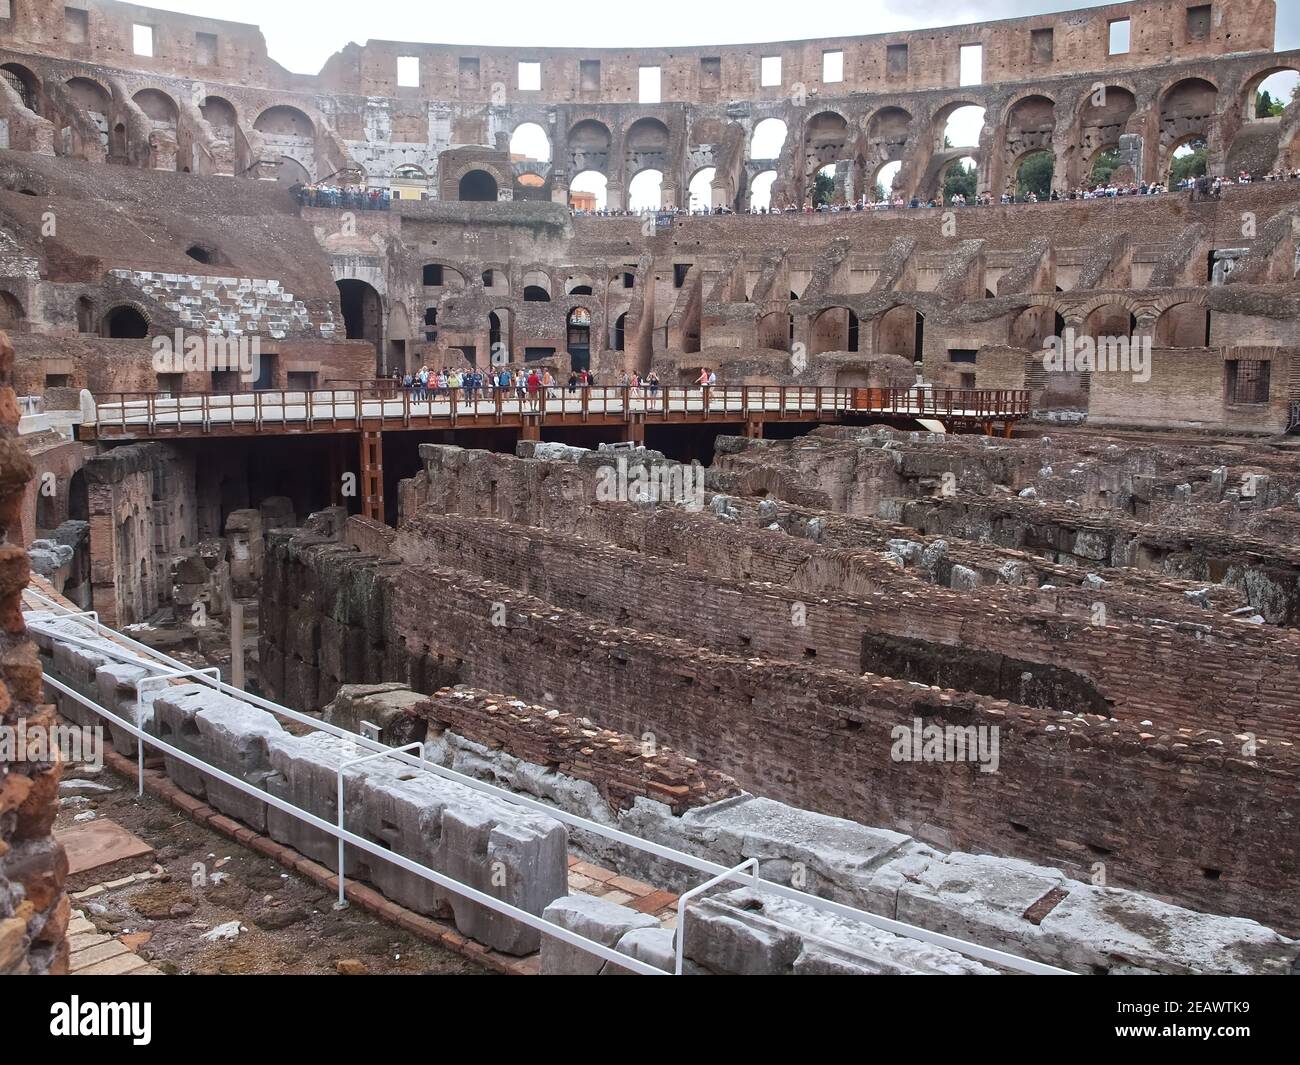 Inside te famous amphitheater Colosseum in rome Stock Photo